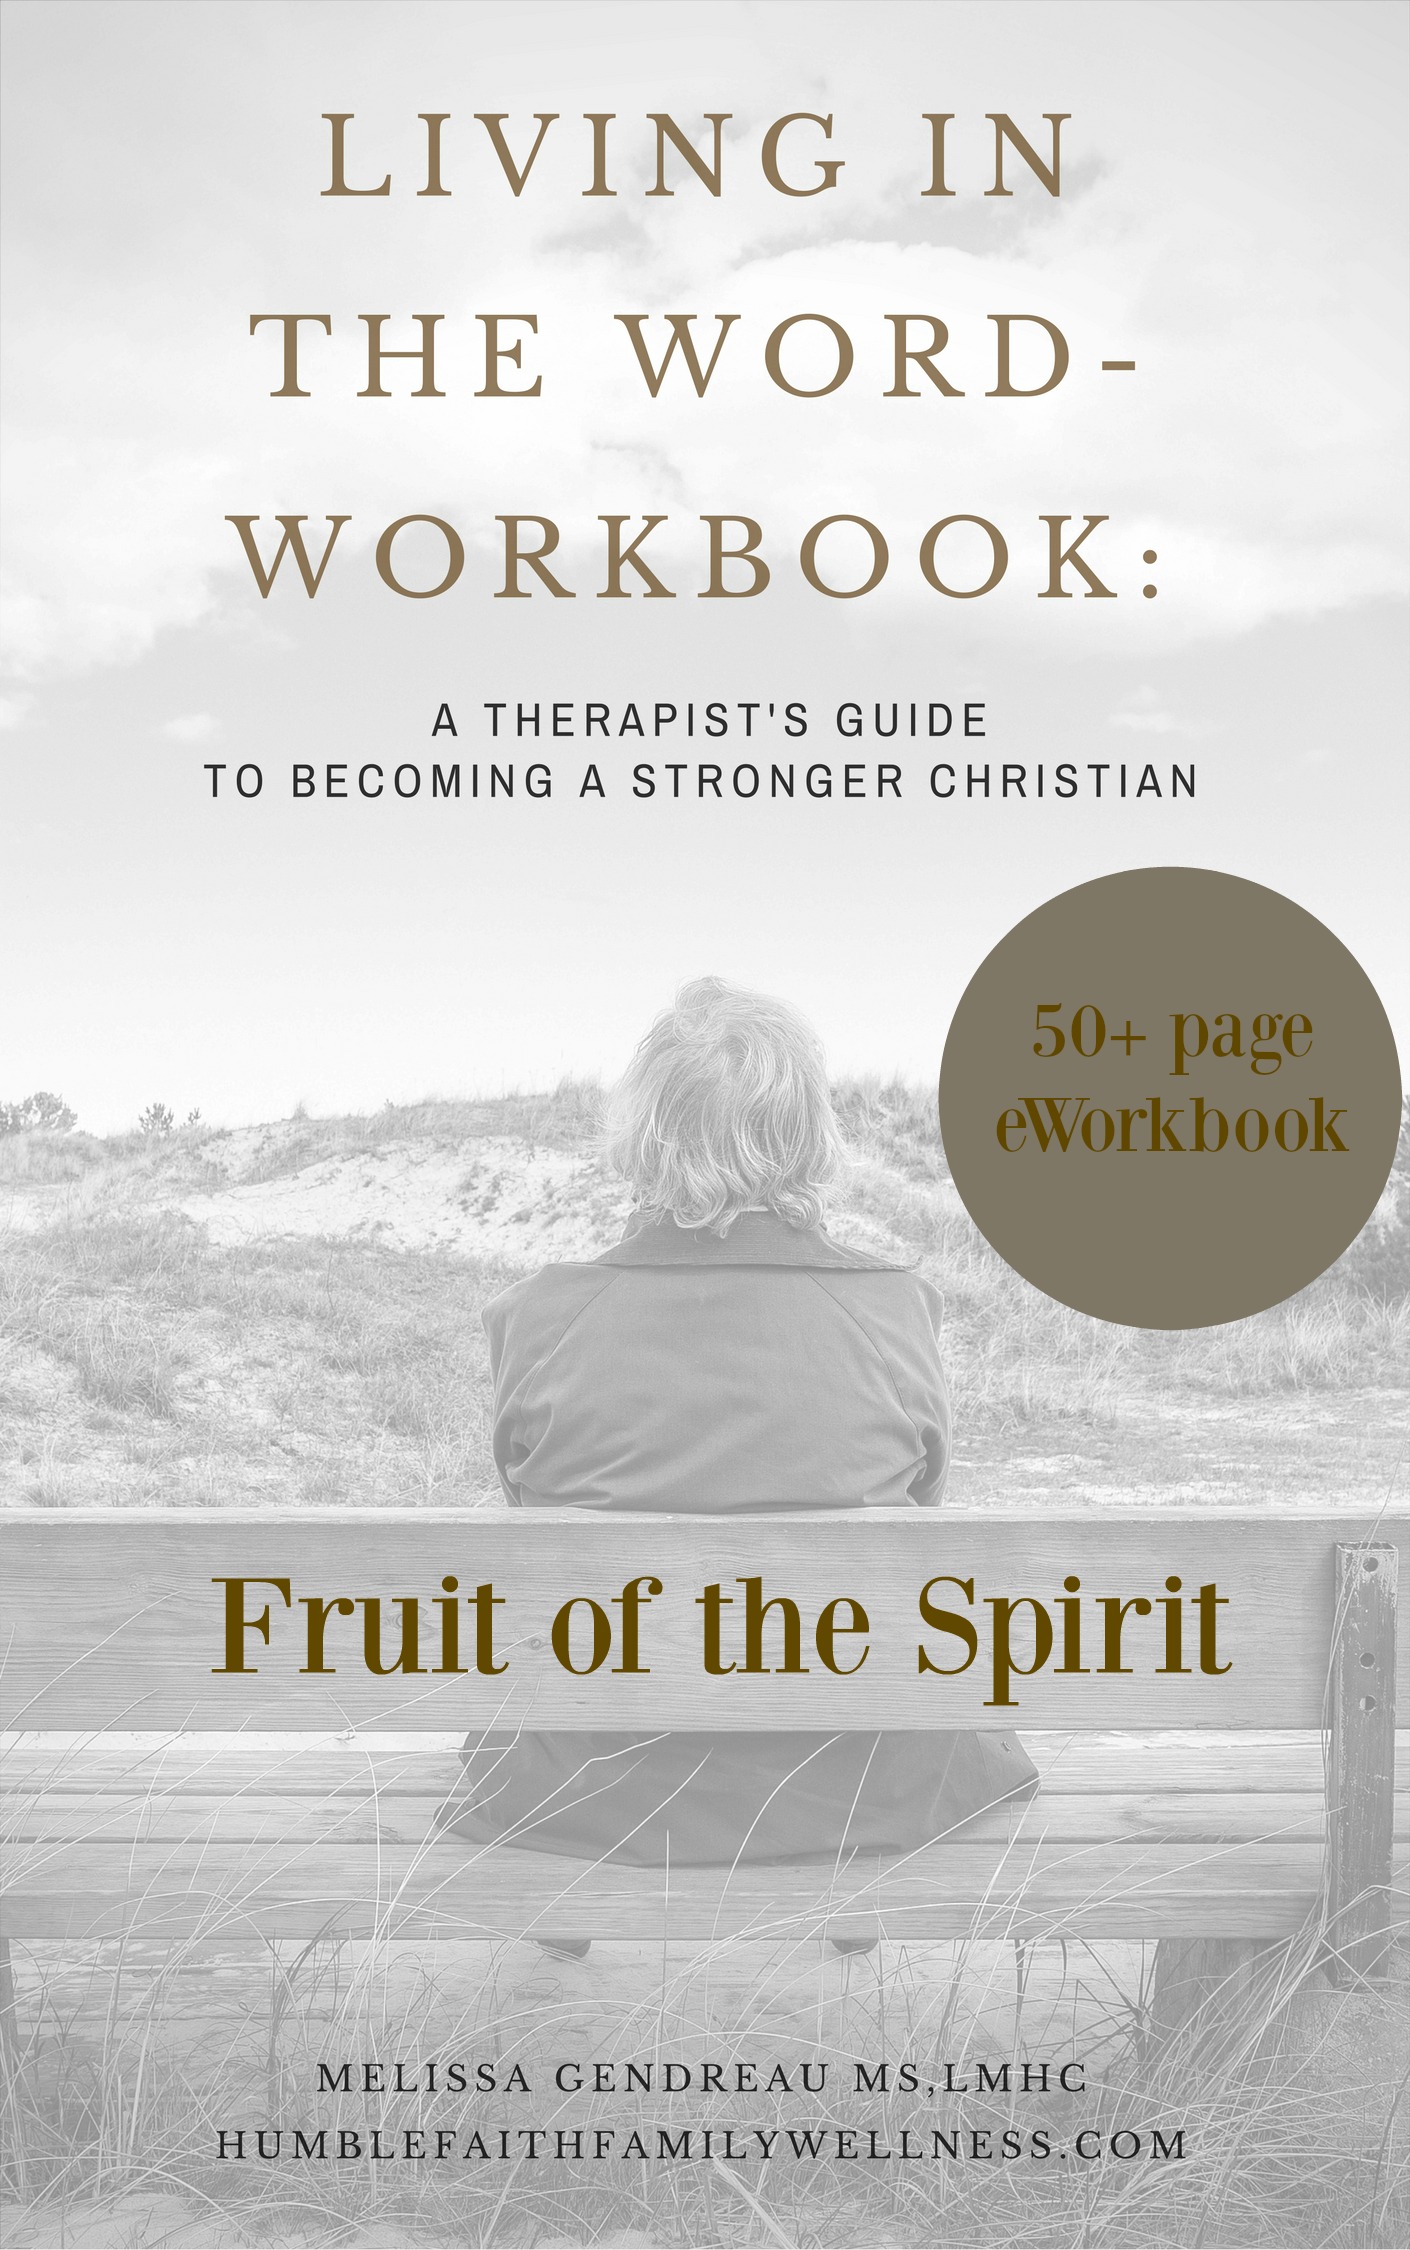 The Living in the Word eWorkbook: Fruit of the Spirit takes you through each characteristic to help you grow in your faith and relationship with God. 